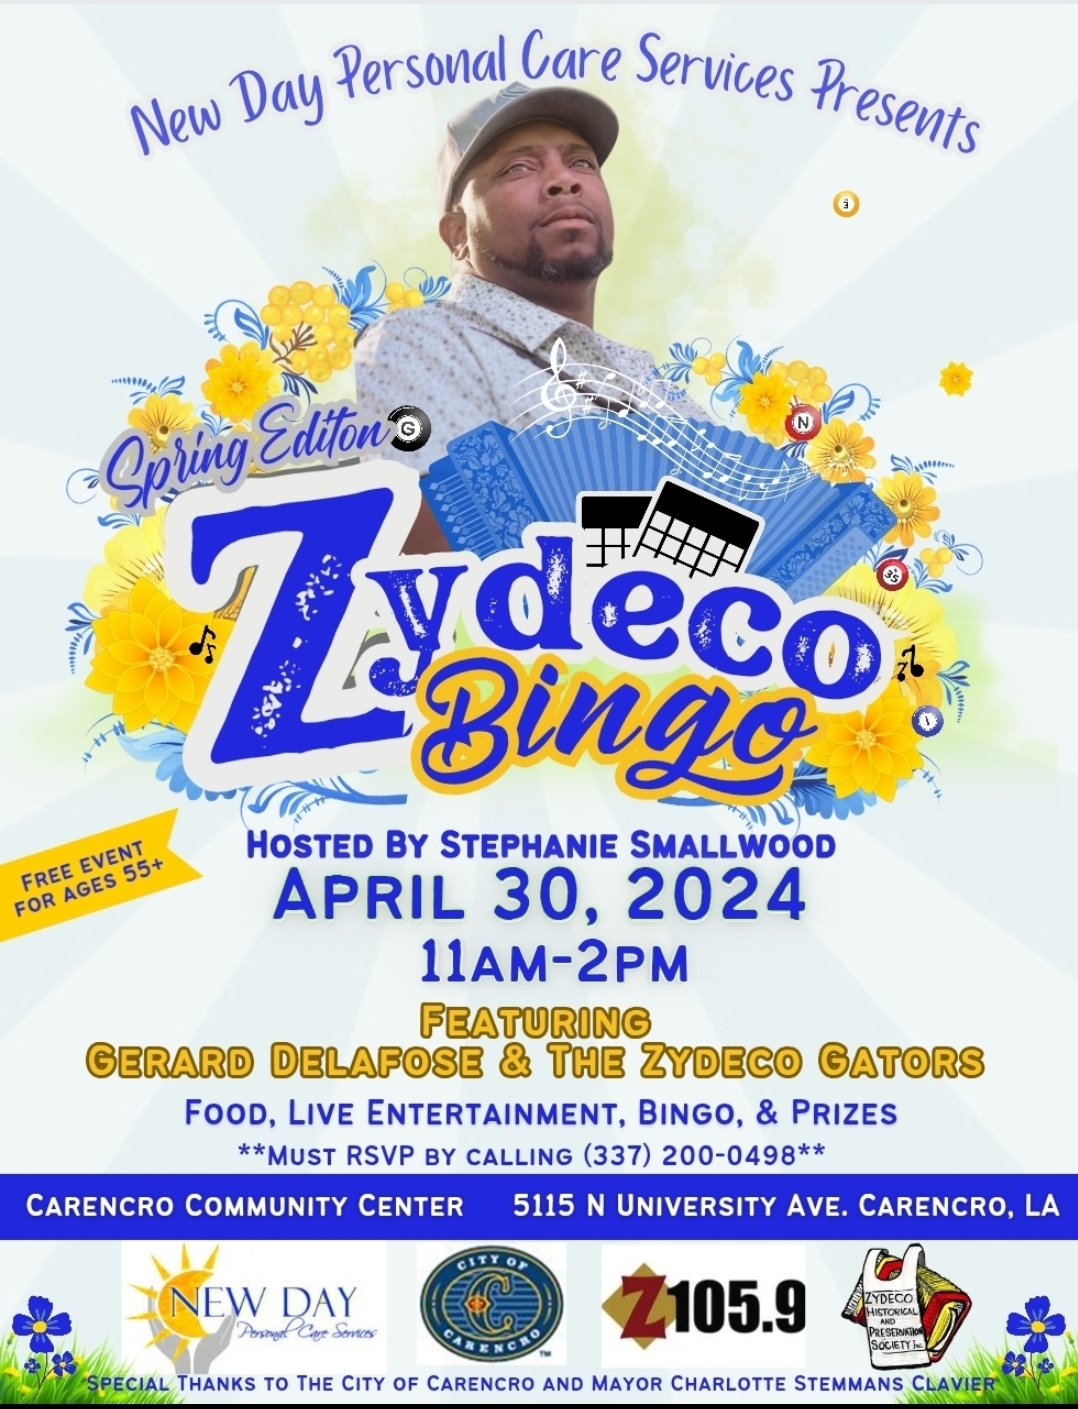 New Day Personal Healthcare & Services Presents Zydeco Bingo - Spring Edition